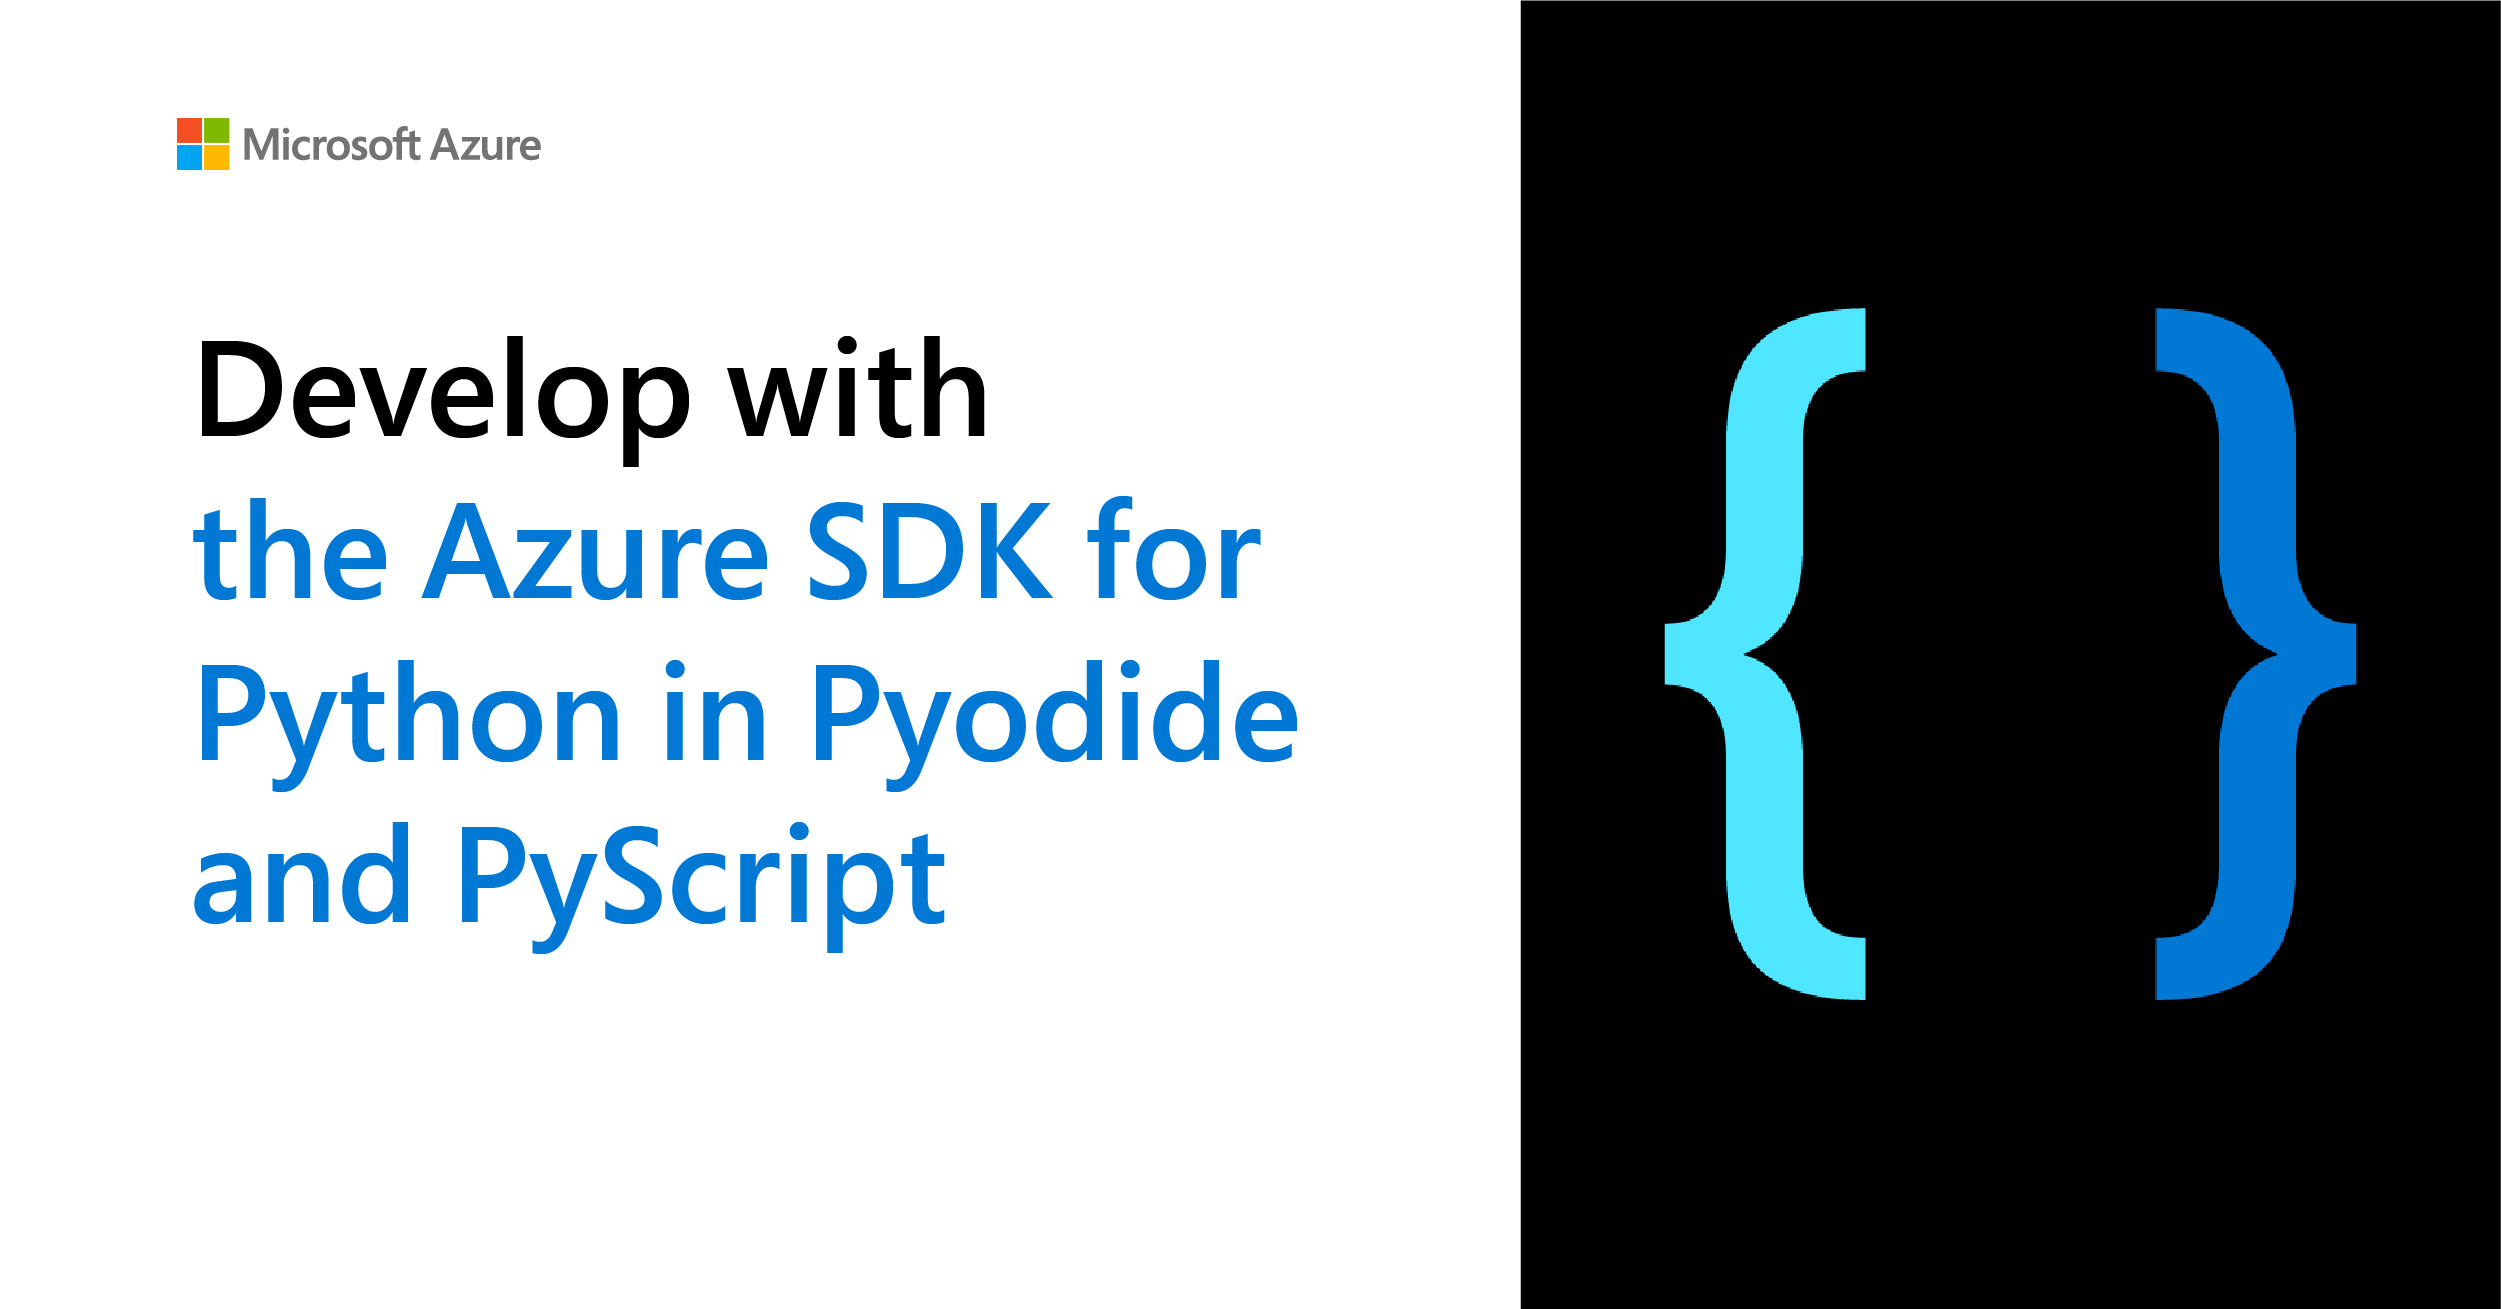 Using the Azure SDK for Python in Pyodide and PyScript